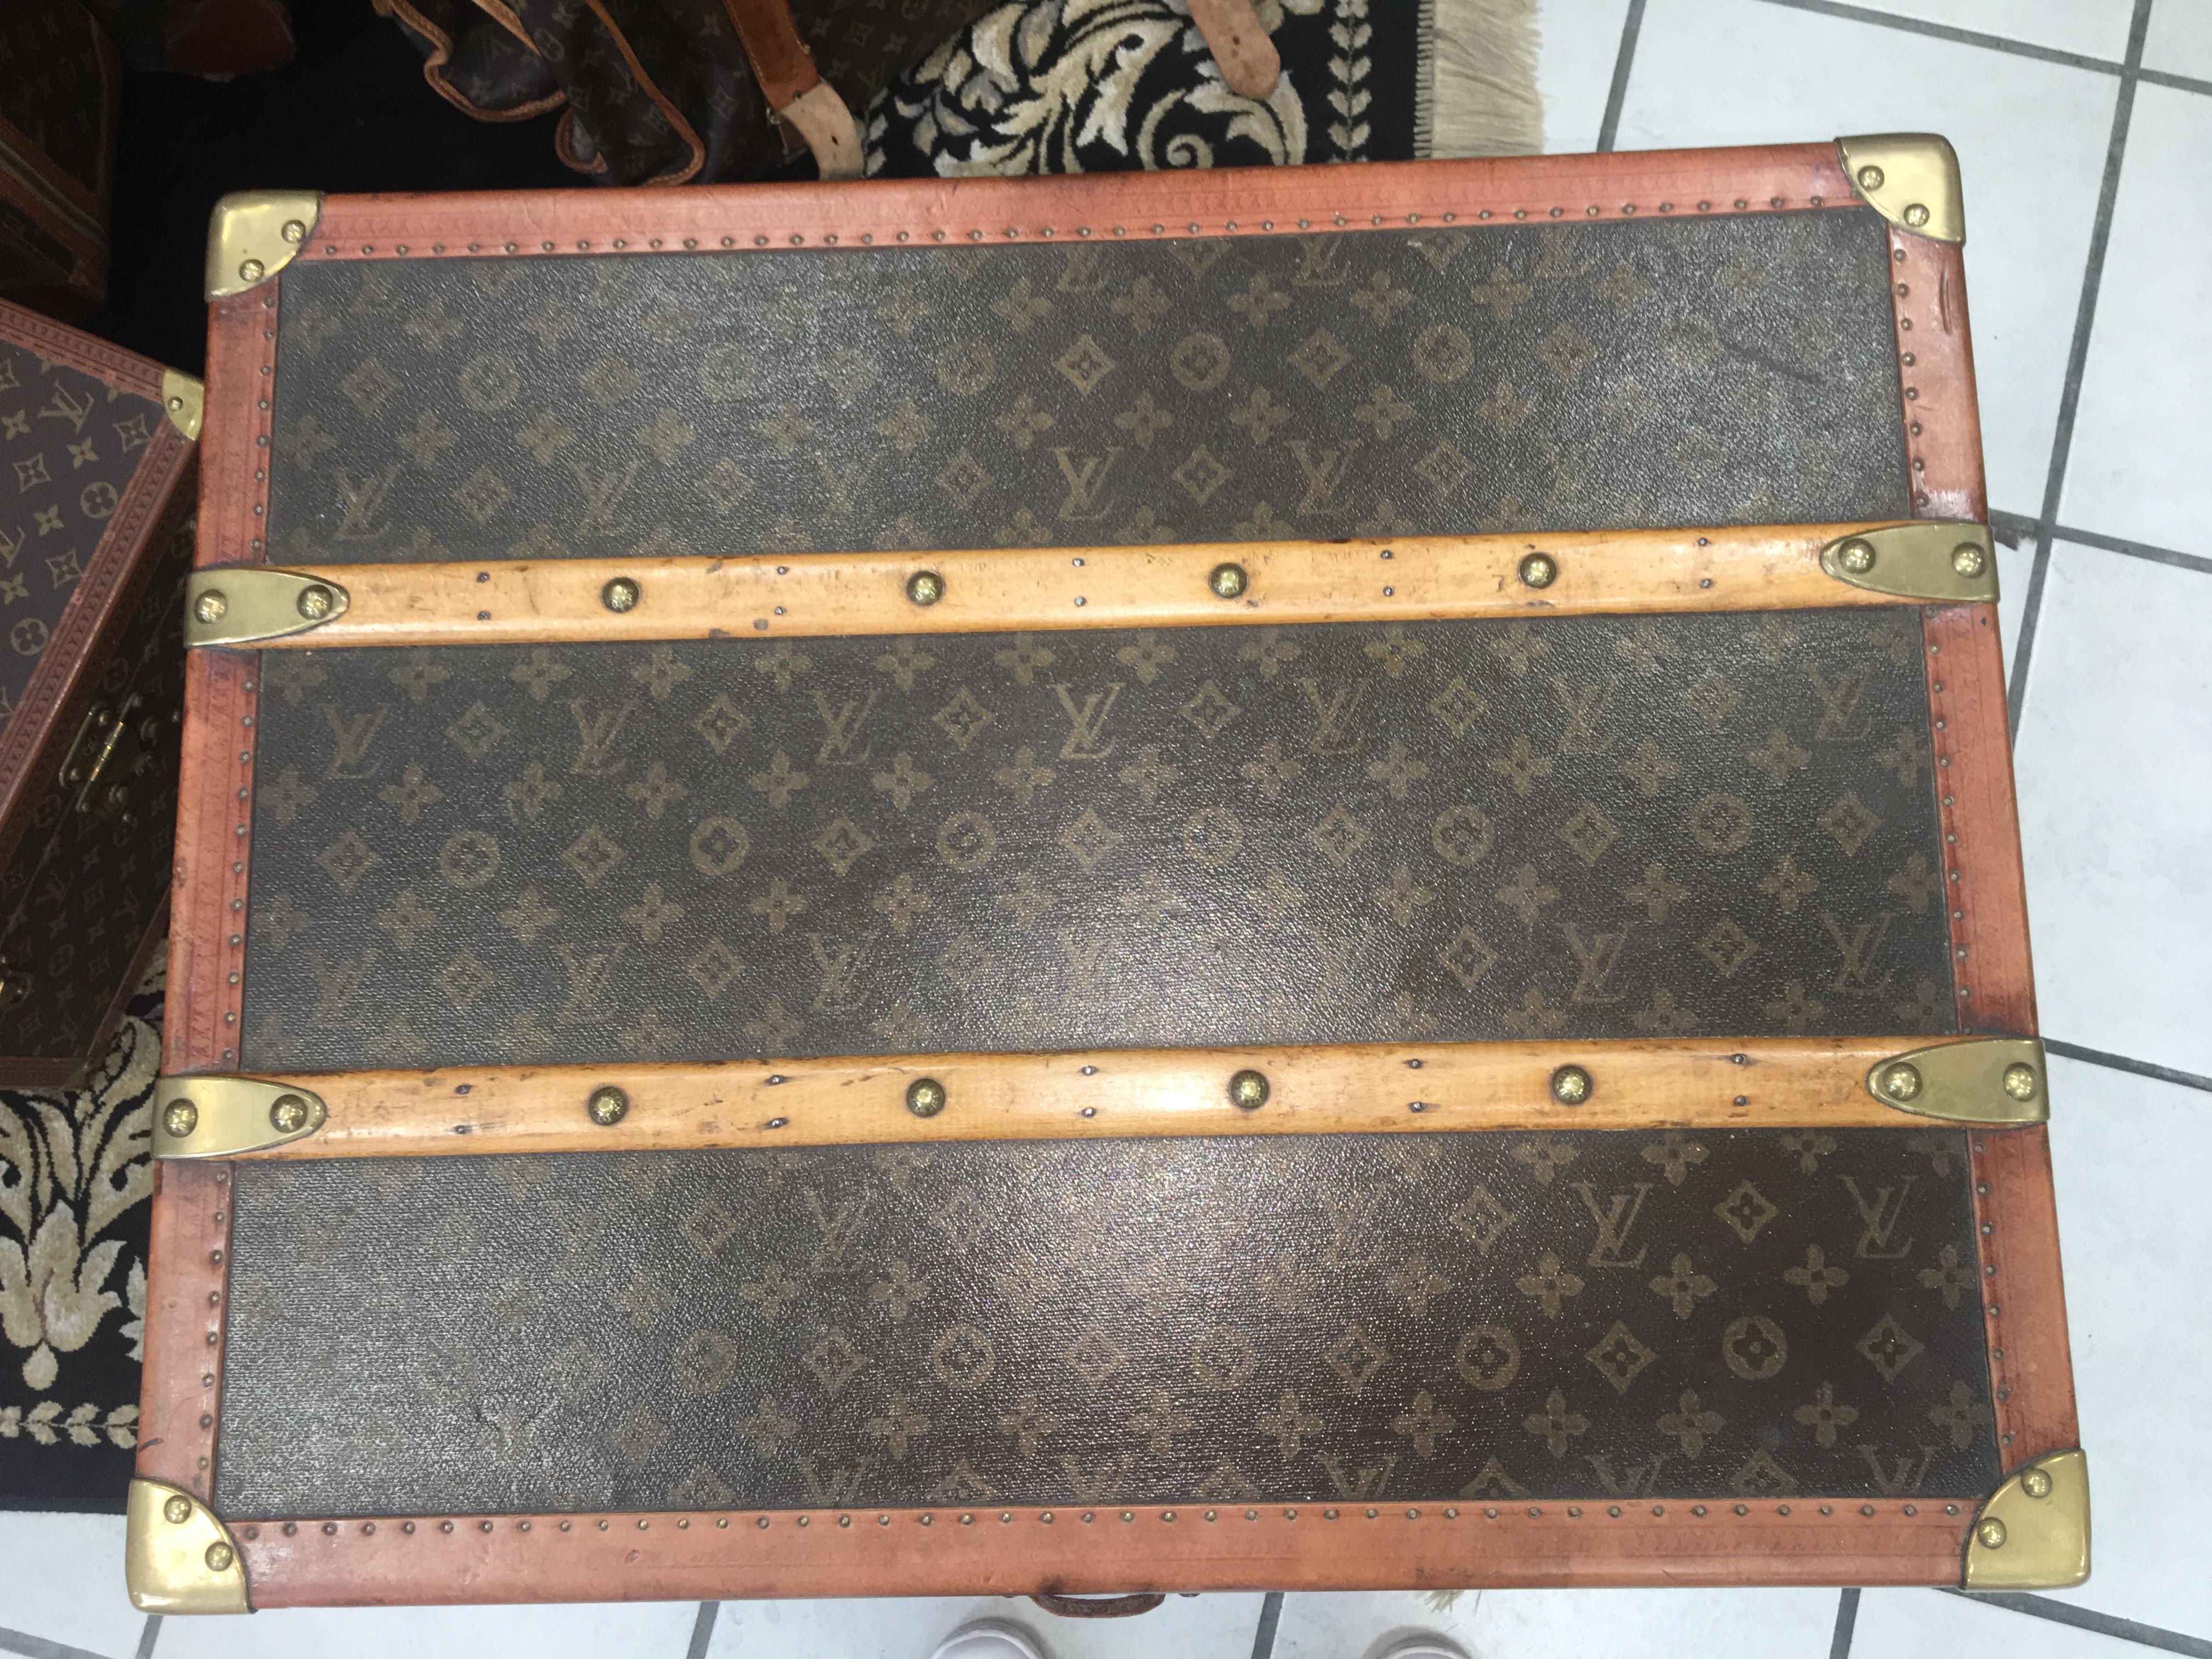 Authentic Louis Vuitton Wardrobe Trunk,  features monogram canvas, all brass hardware, and leather trim. 
A very rare and top of the line model.
Original owner initials and city on sides: 